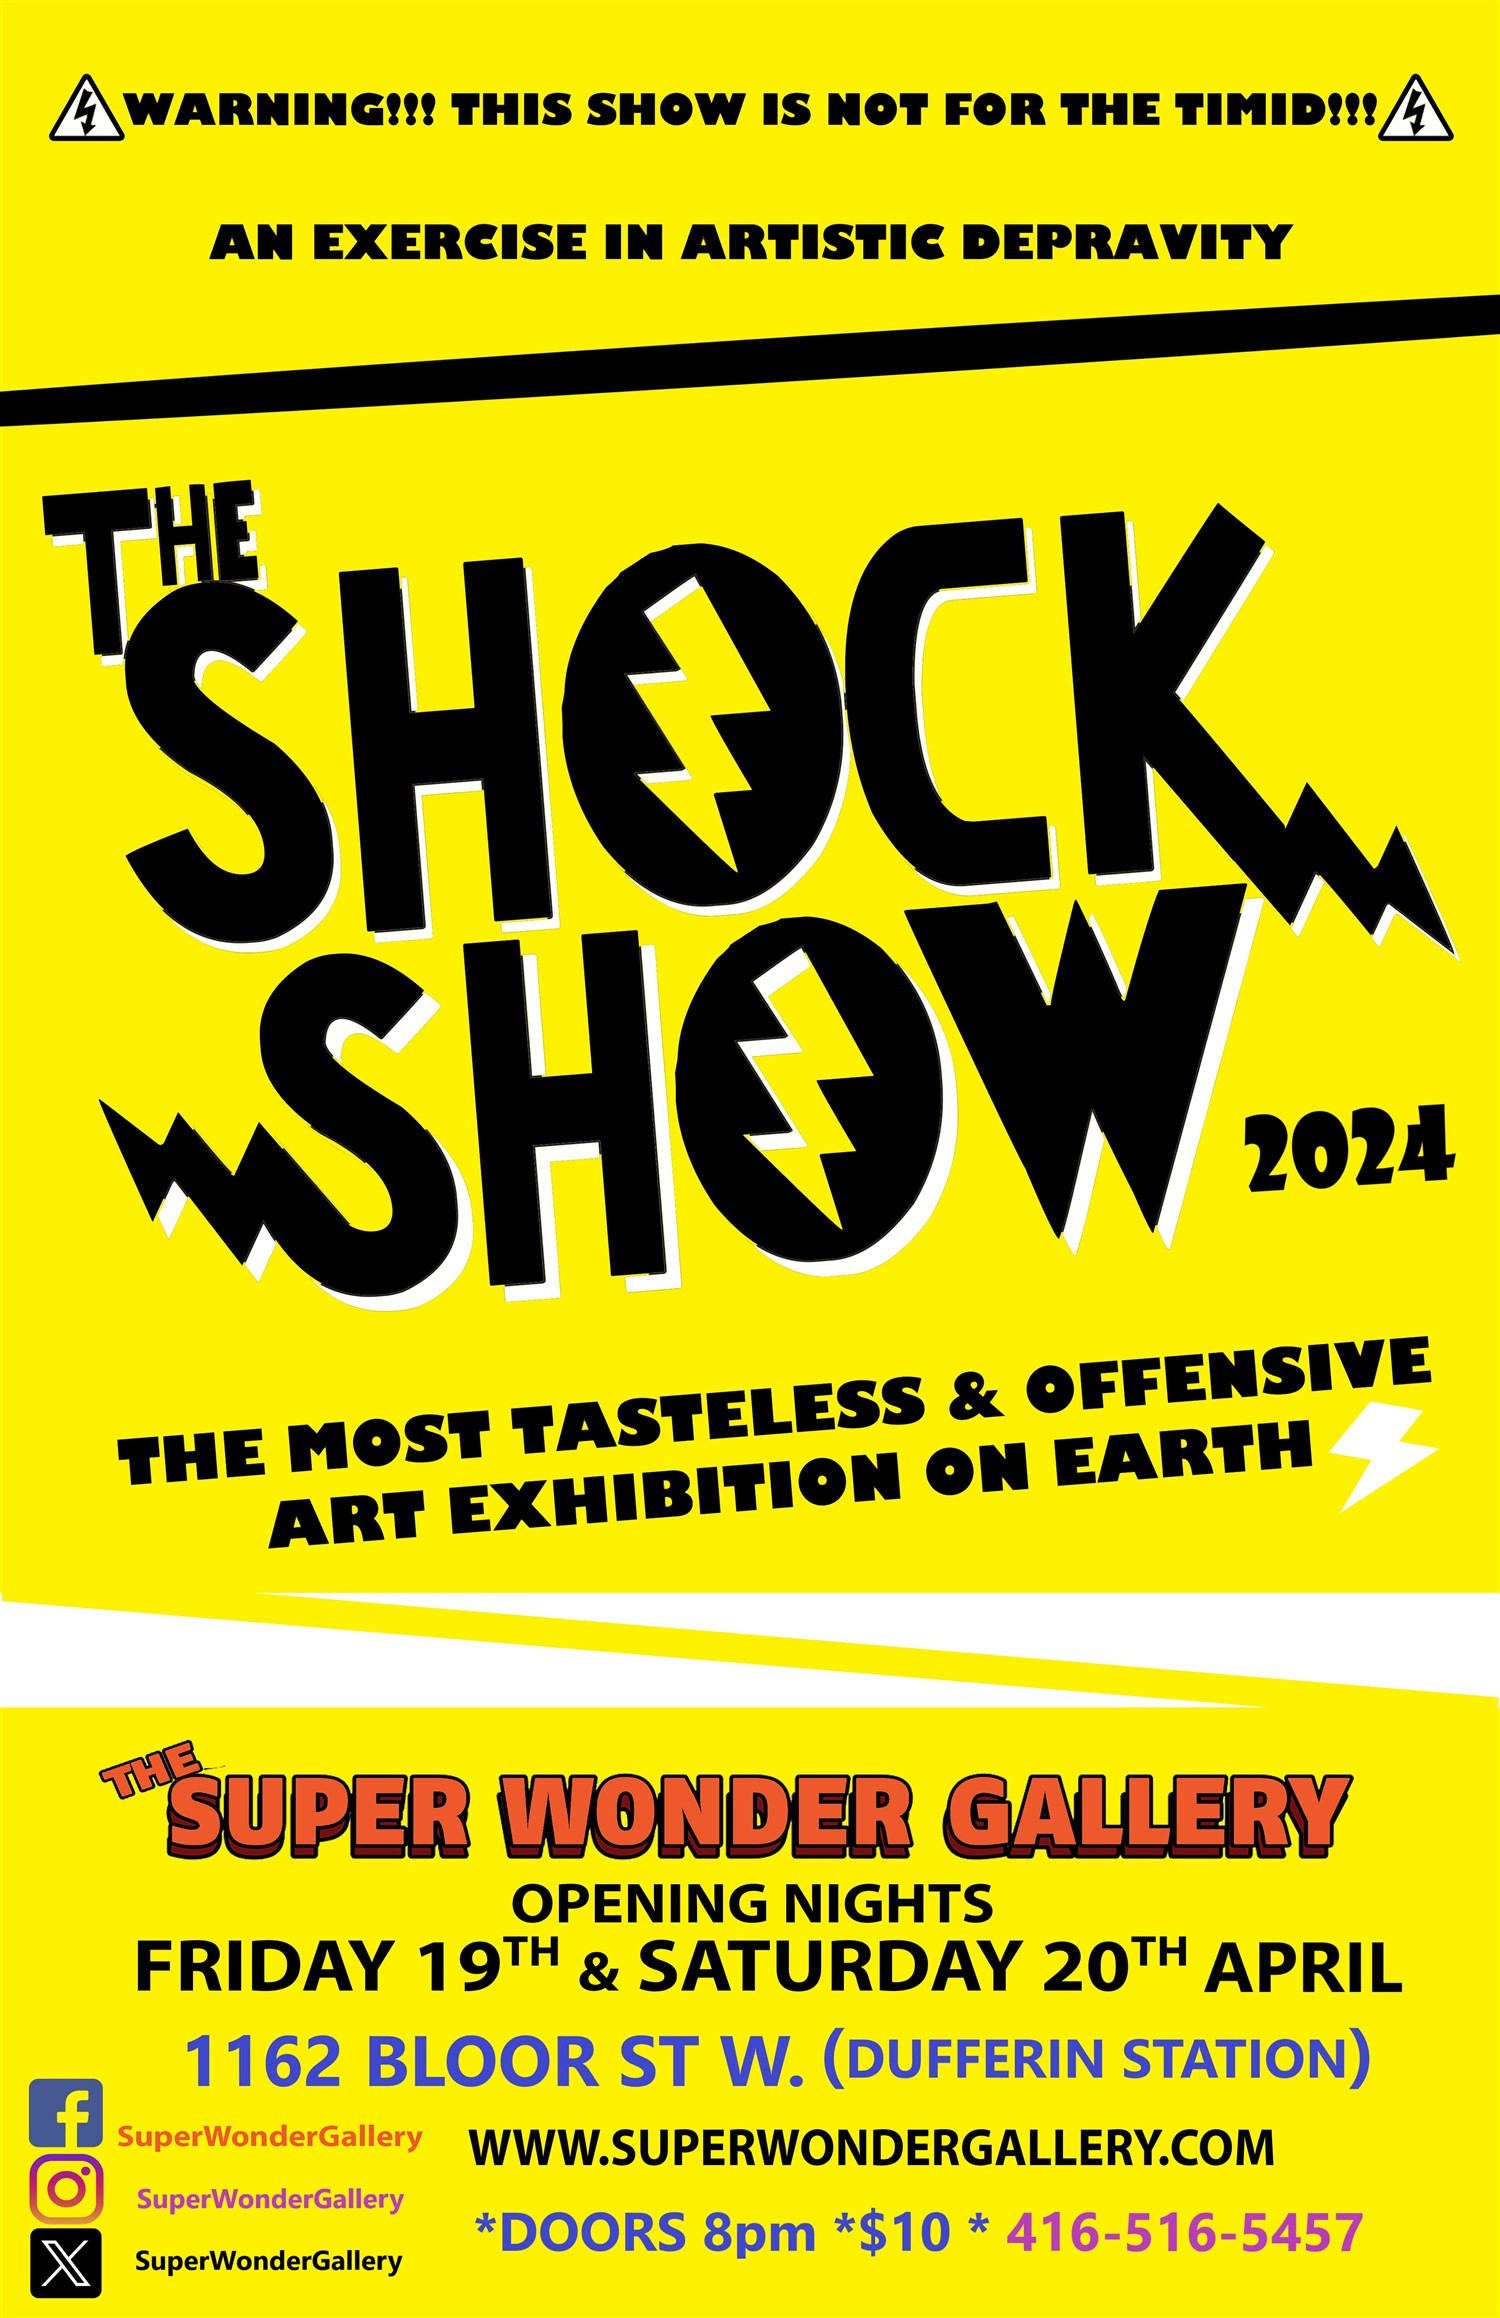 The SHOCK SHOW SATURDAY The most tasteless and offensive art exhibition on earth! on Apr 20, 20:00@SUPER WONDER GALLERY - Buy tickets and Get information on Super Wonder Gallery 